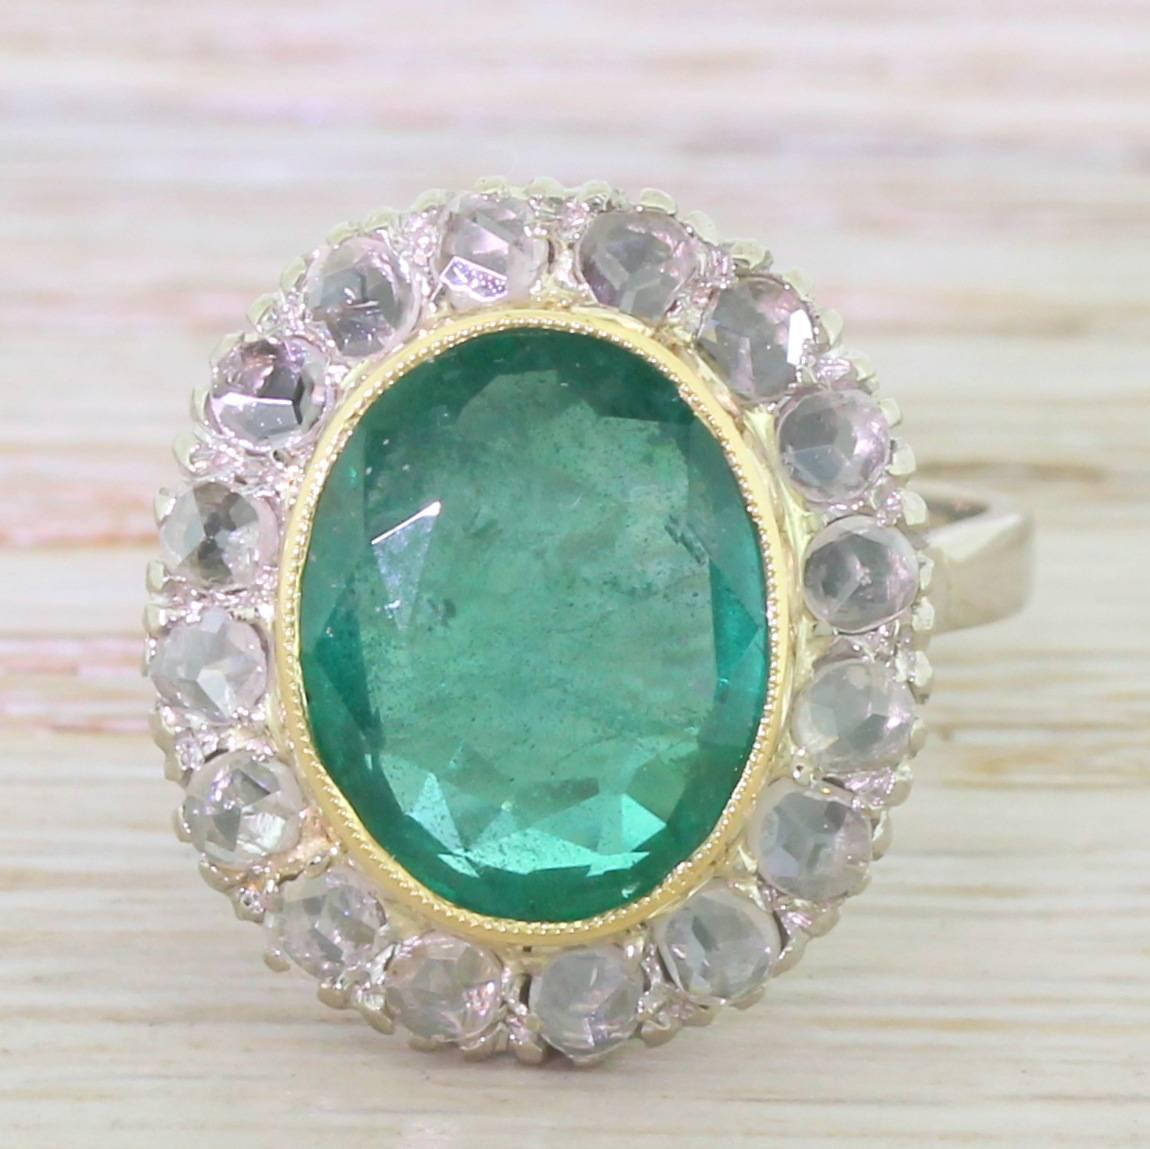 A bright, rich medium green oval cut emerald is rubover and milgrain set in yellow gold, with sixteen rose cut diamonds in the surround. This wonderful statement ring features fleur de lis shoulders at the shoulders leading to a flat white gold